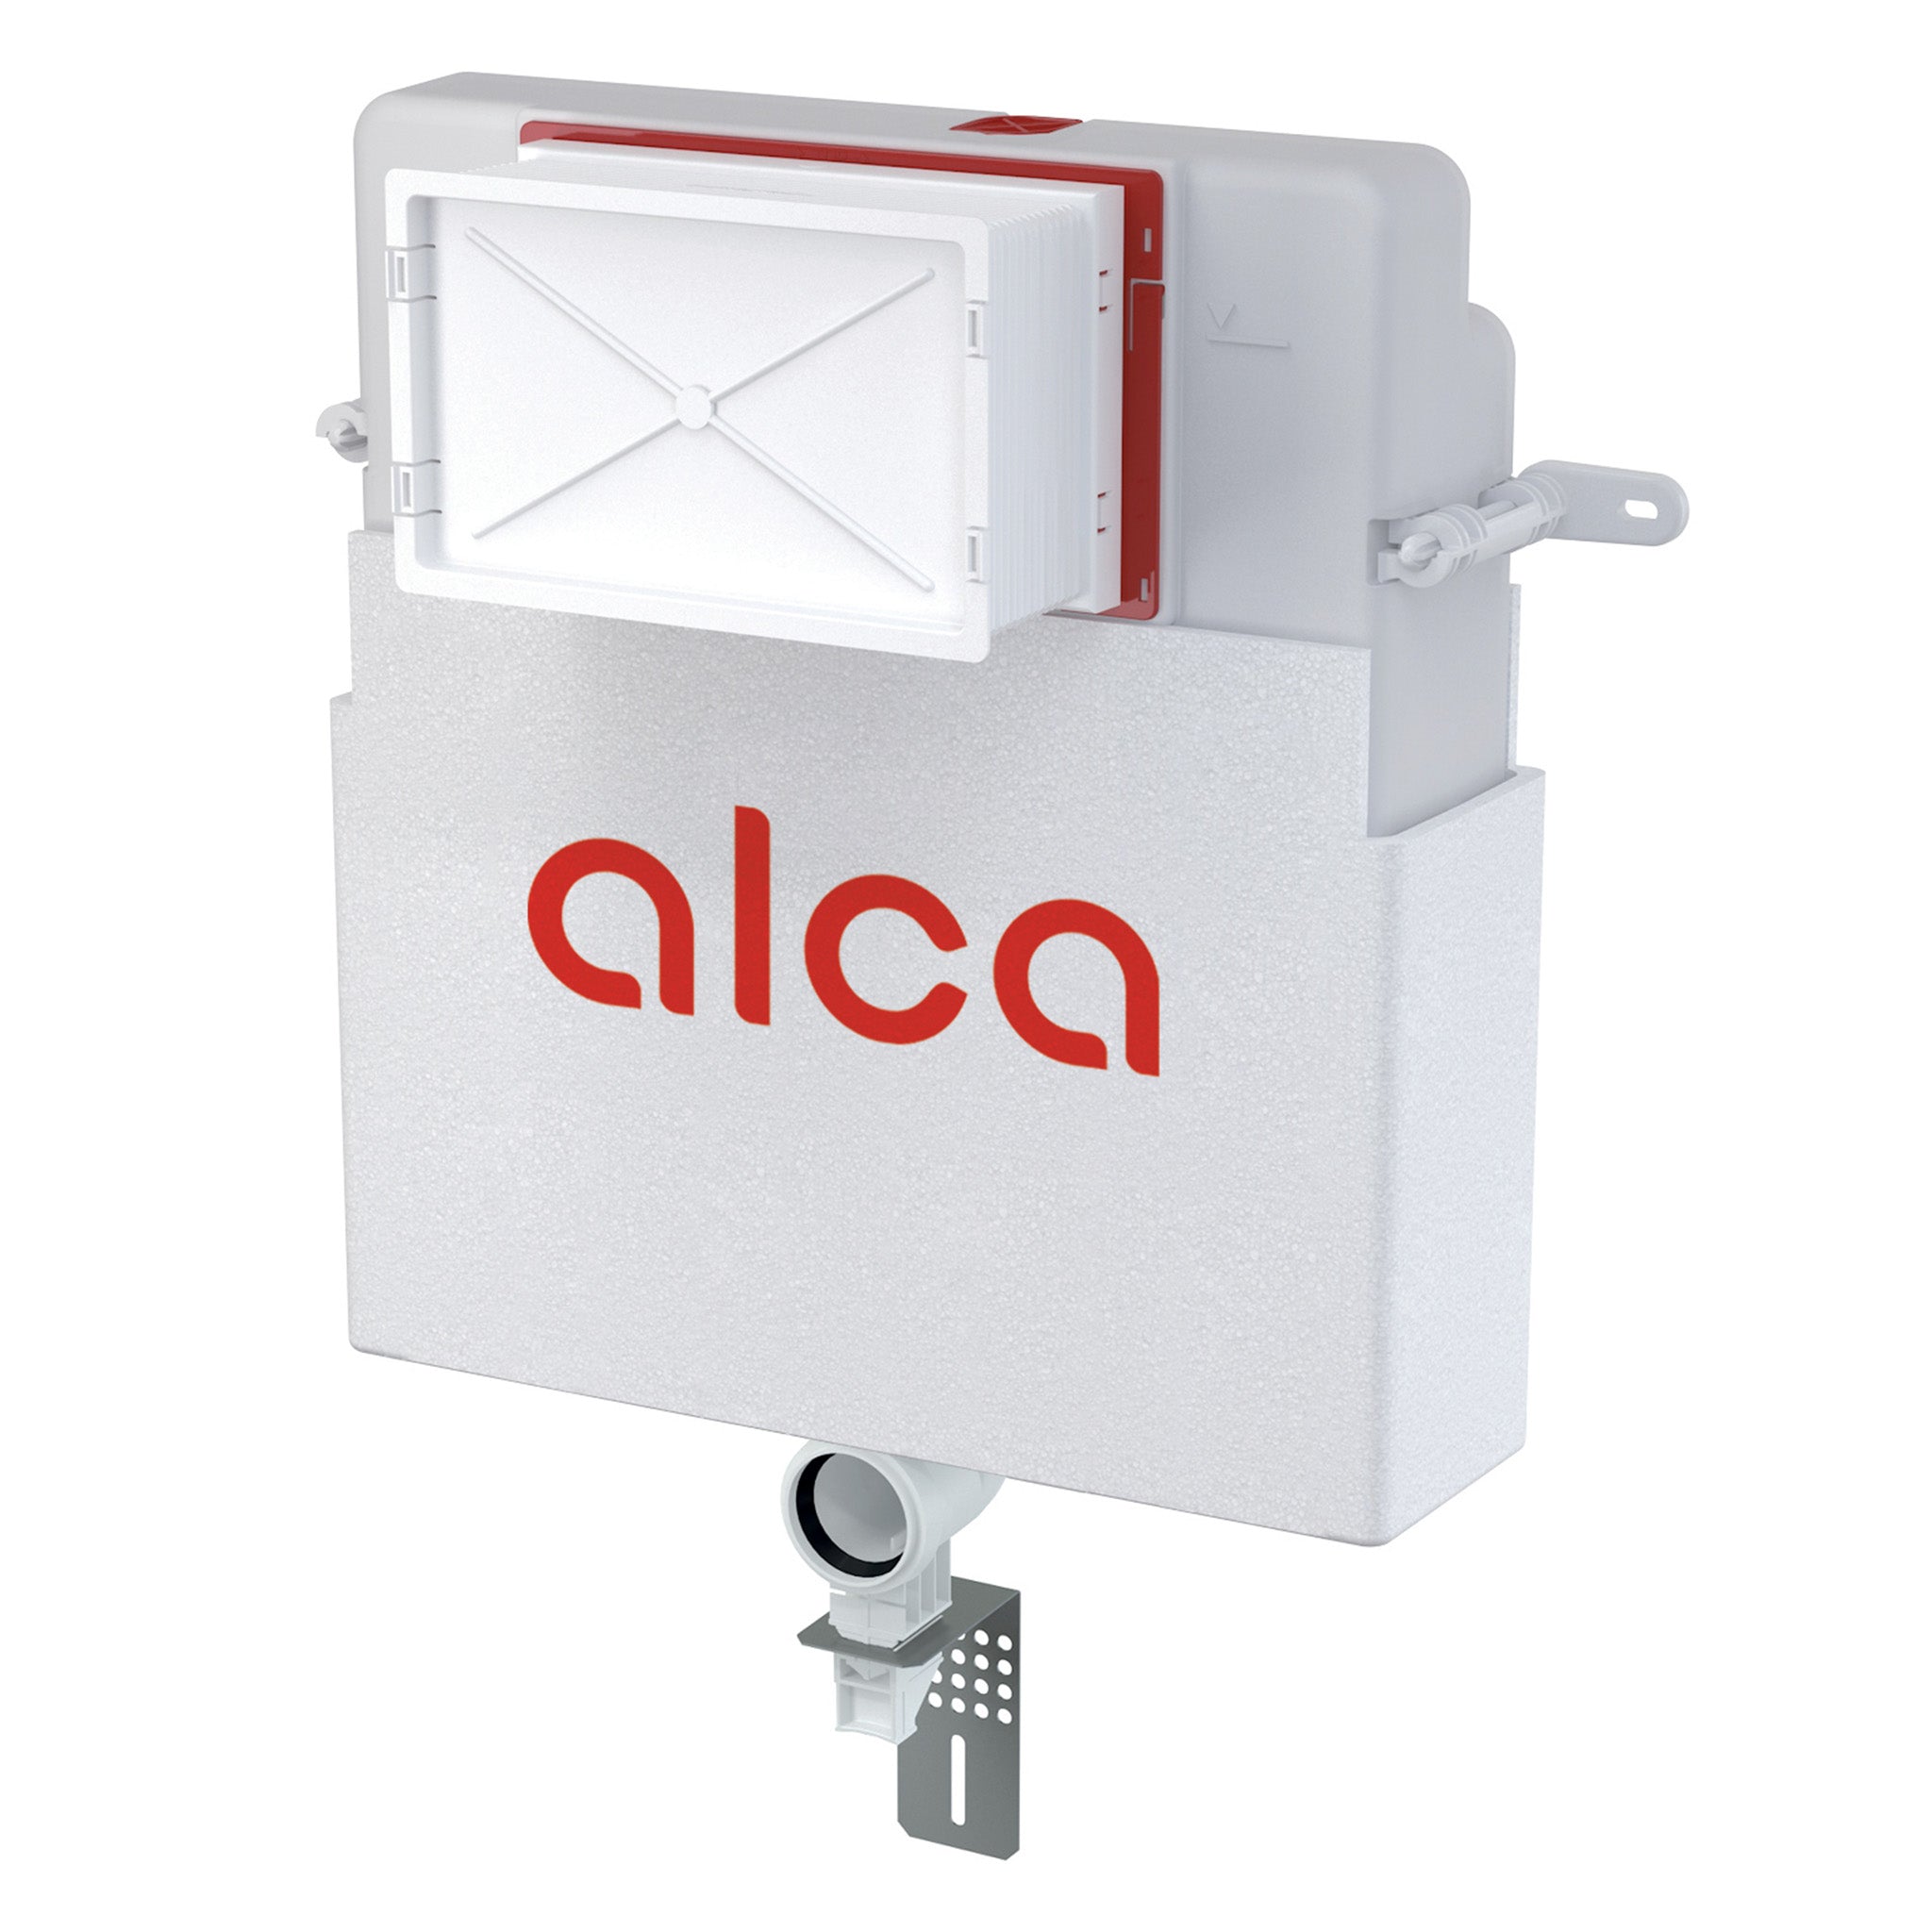 MyStyle Alca Reduced Height Concealed Cistern